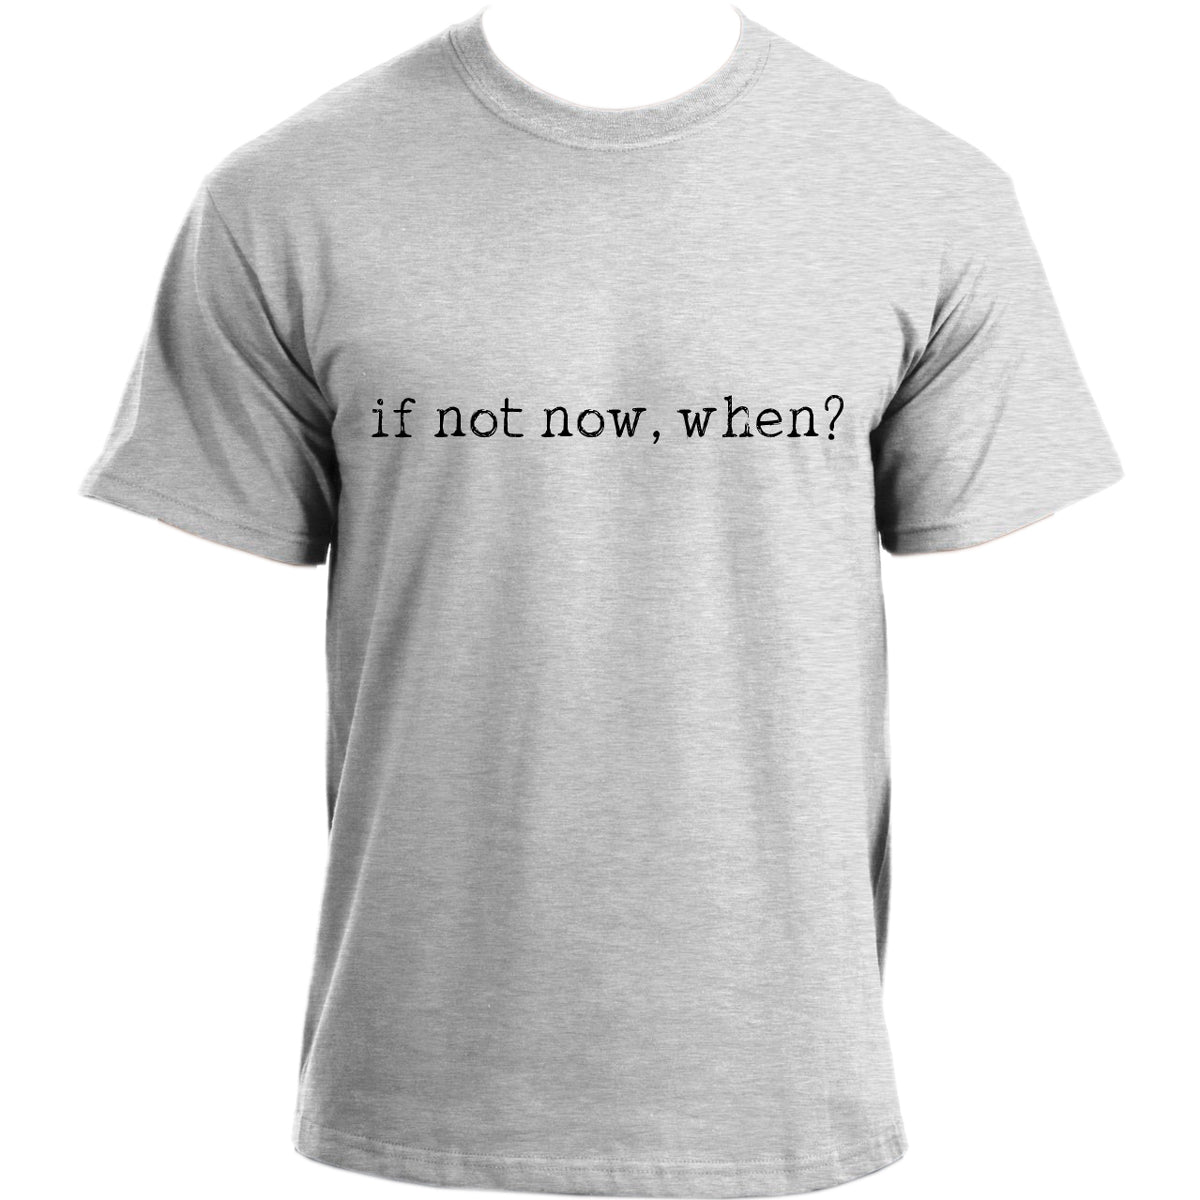 If not now, when? I Motivational quote t-shirt I Productivity Mindset T Shirt